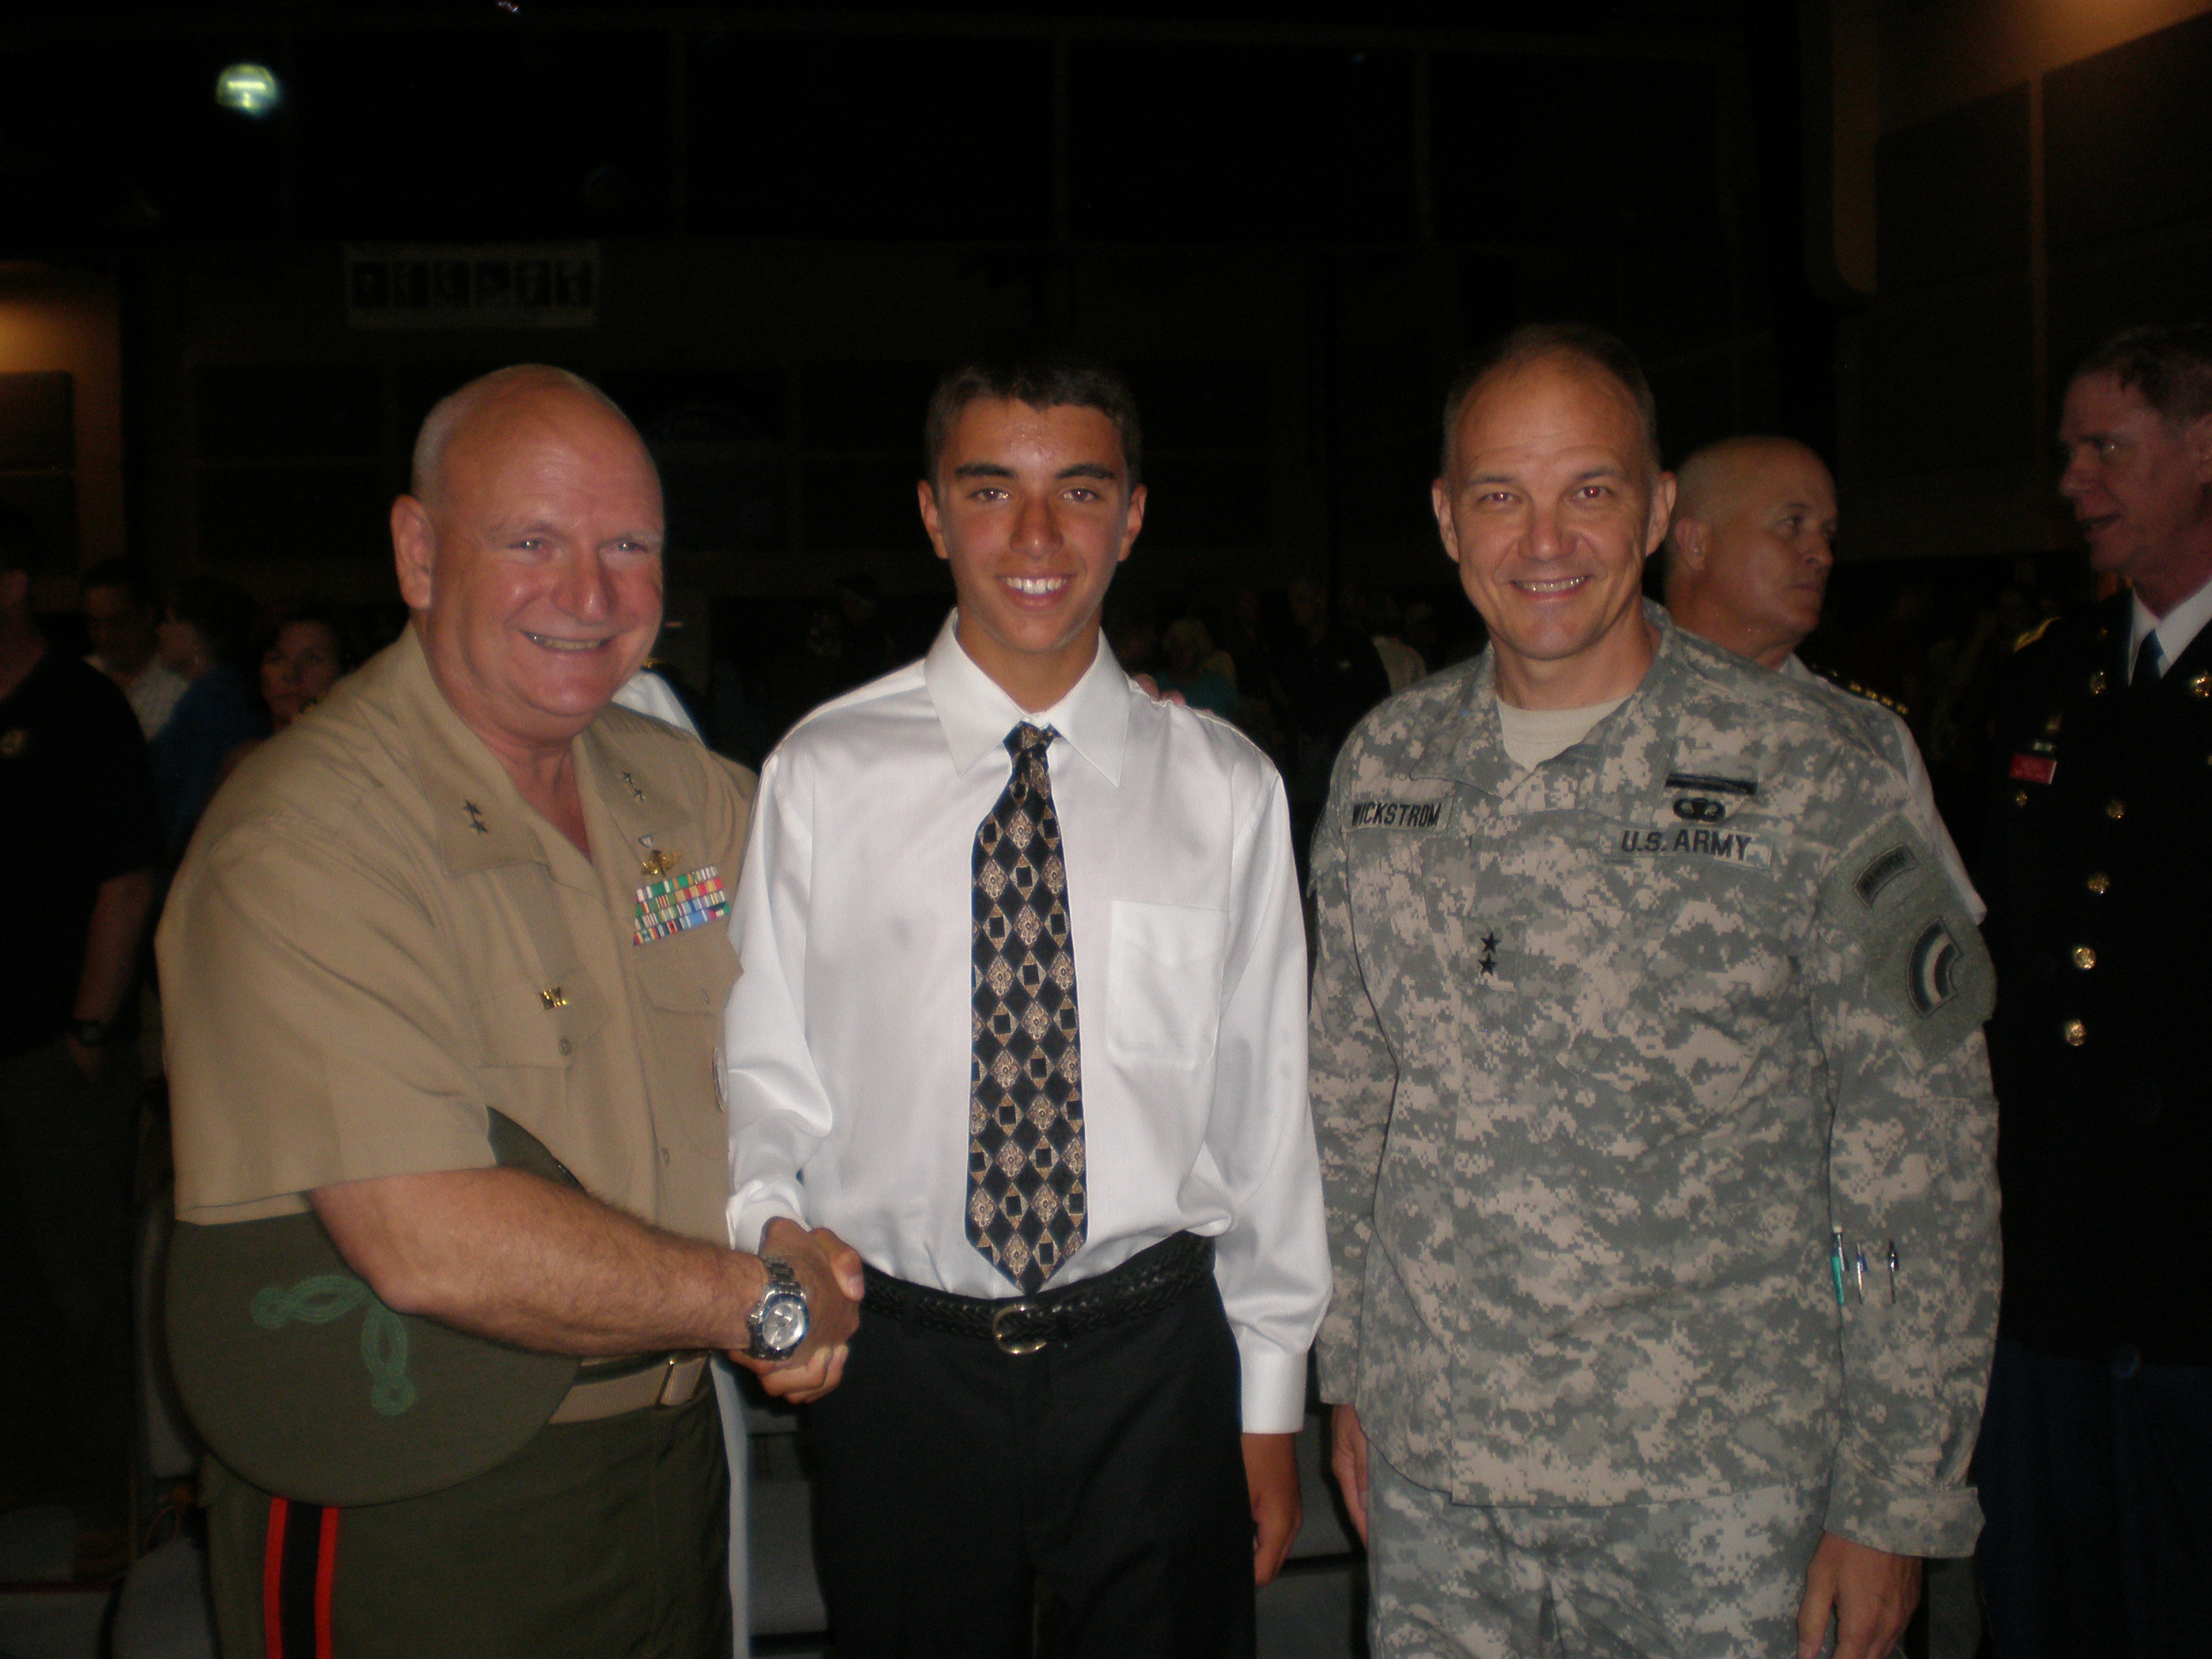 Christopher with General Wolff, Commander of the Navy Militia and Major General Steve Wickstrom of US Army recognition of Christophers song he wrote for our Veterans.